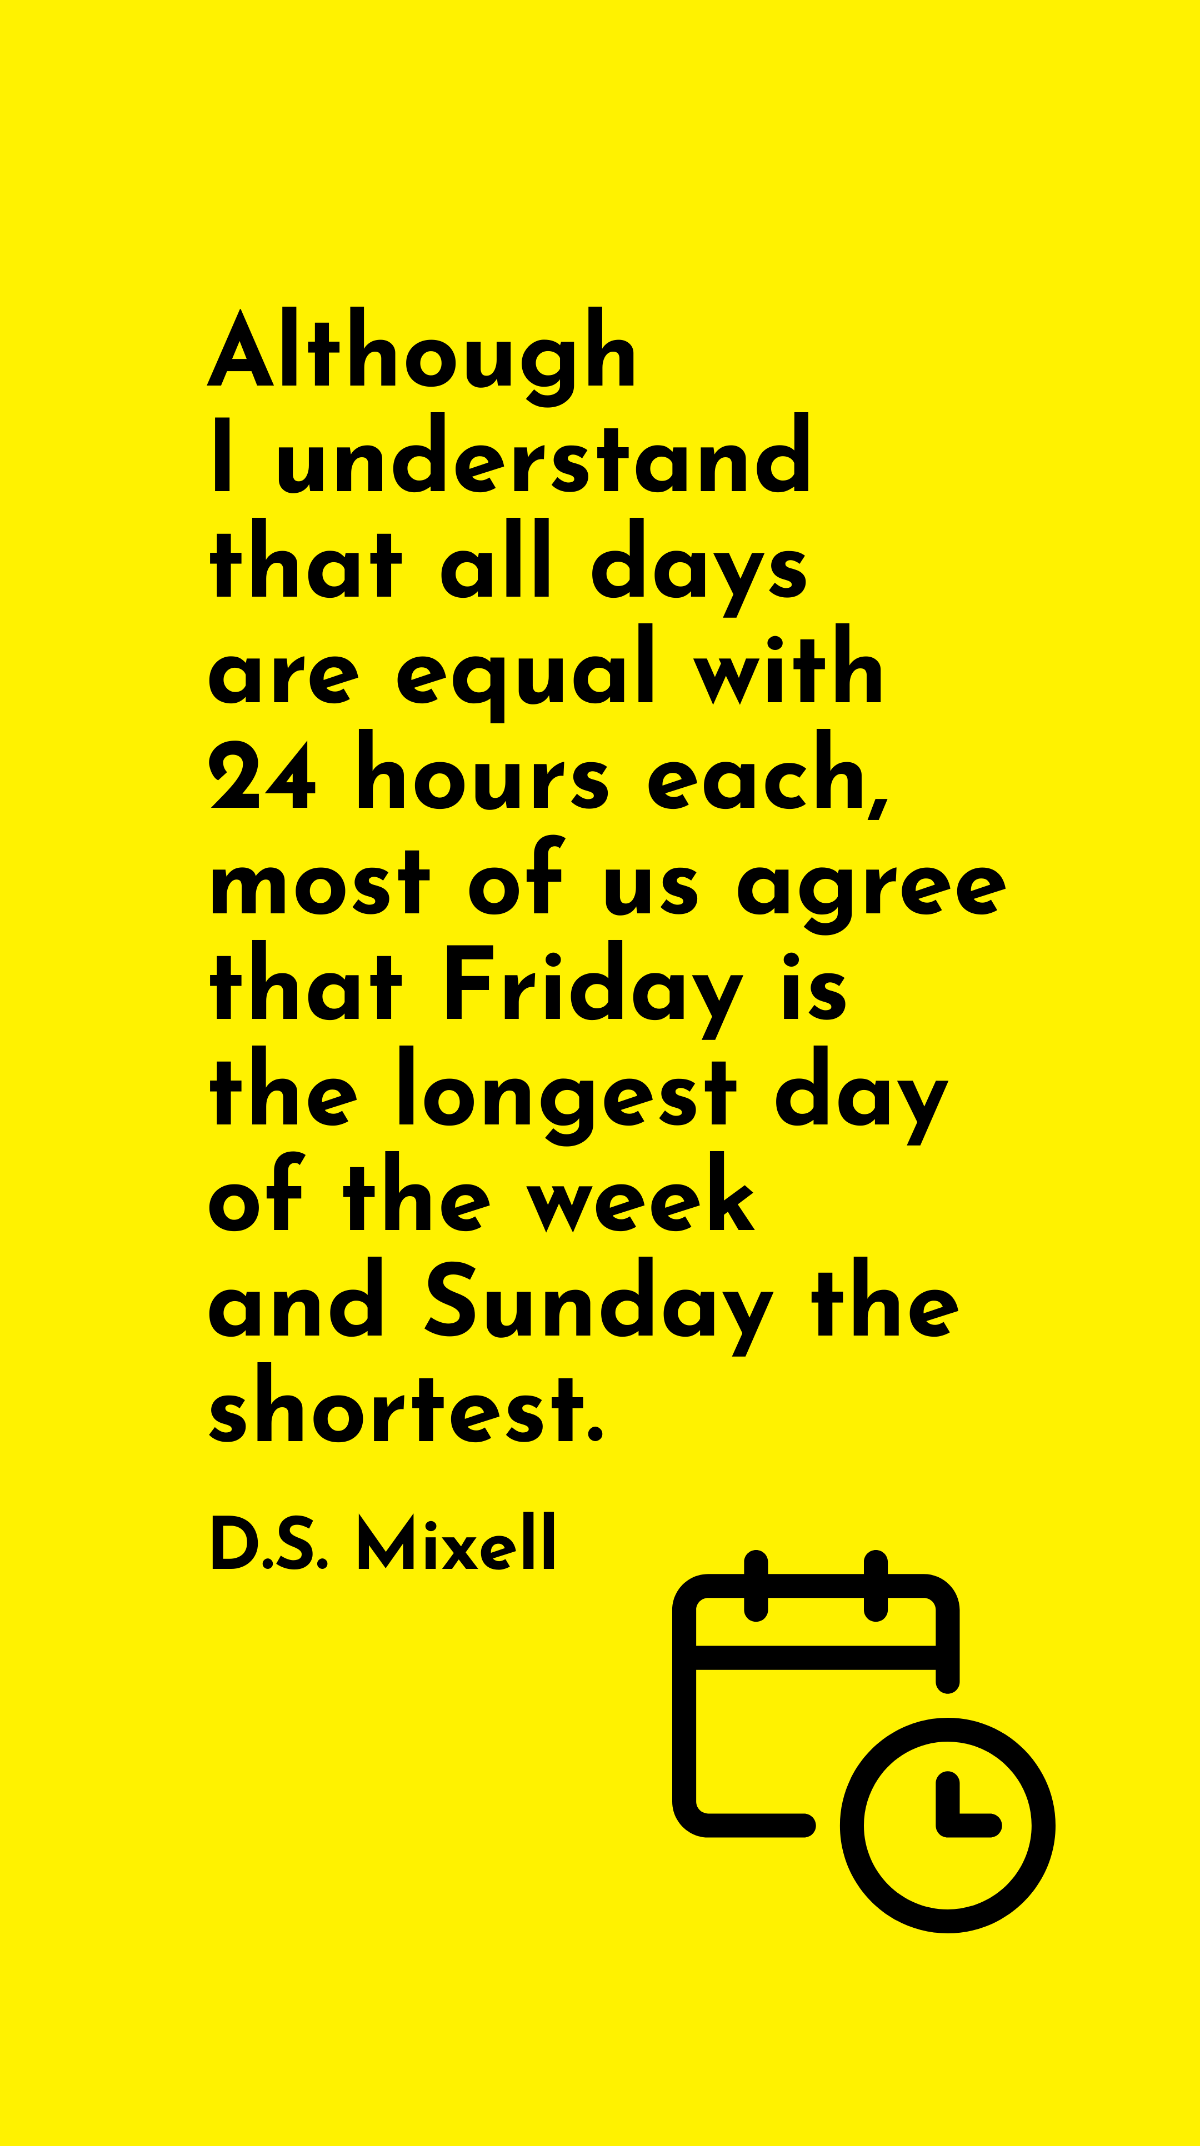 Free D.S. Mixell - Although I understand that all days are equal with 24 hours each, most of us agree that Friday is the longest day of the week and Sunday the shortest. Template